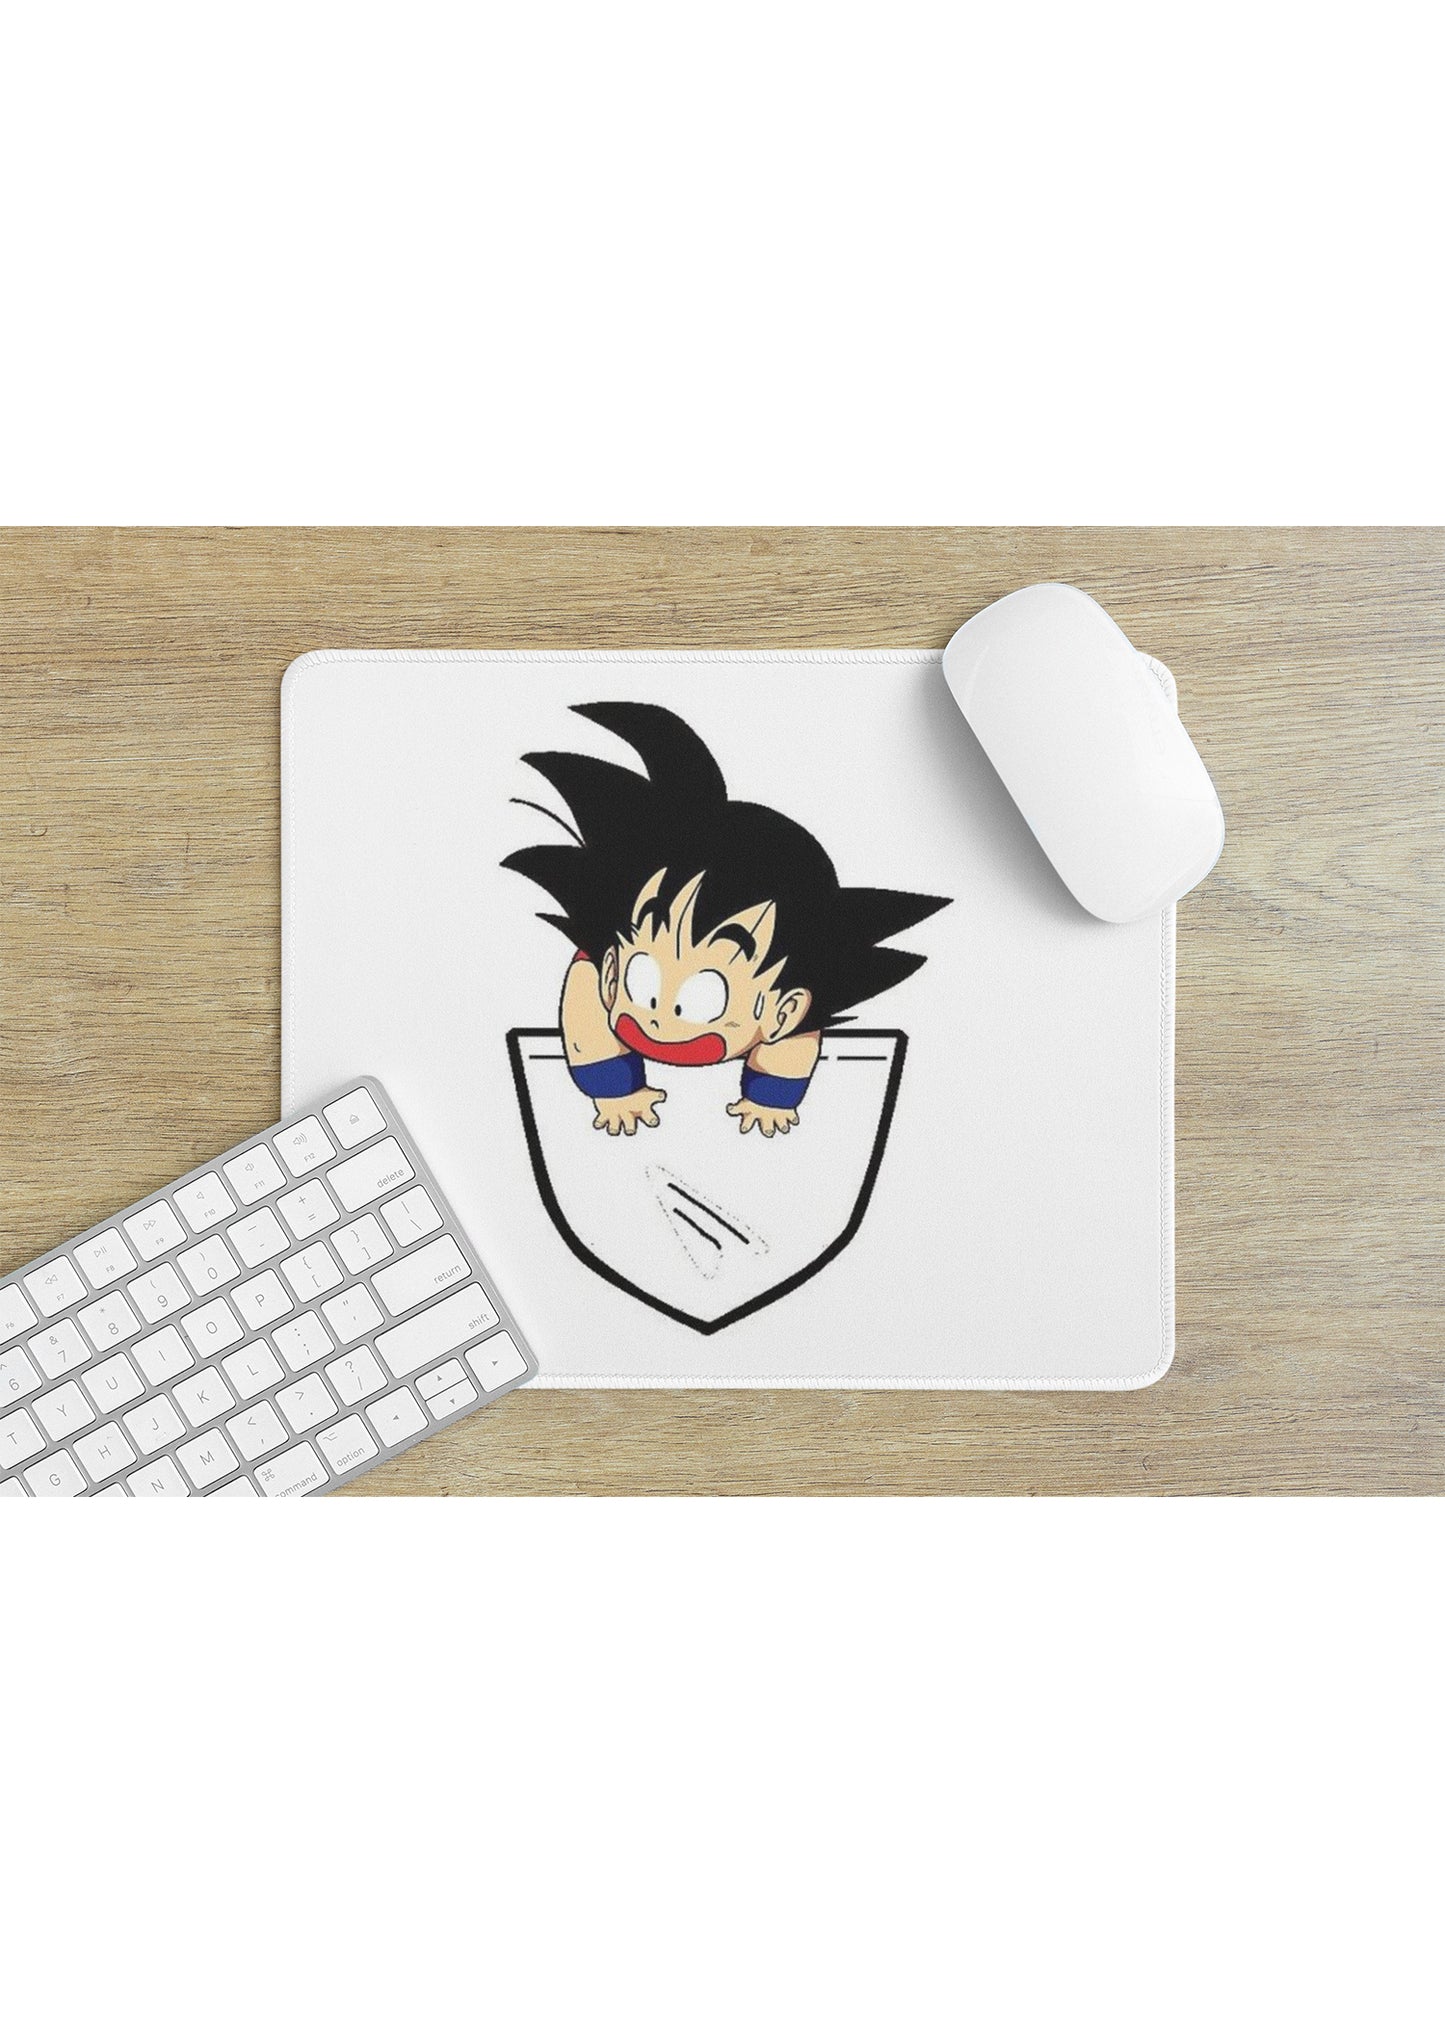 ANIME MOUSE PAD